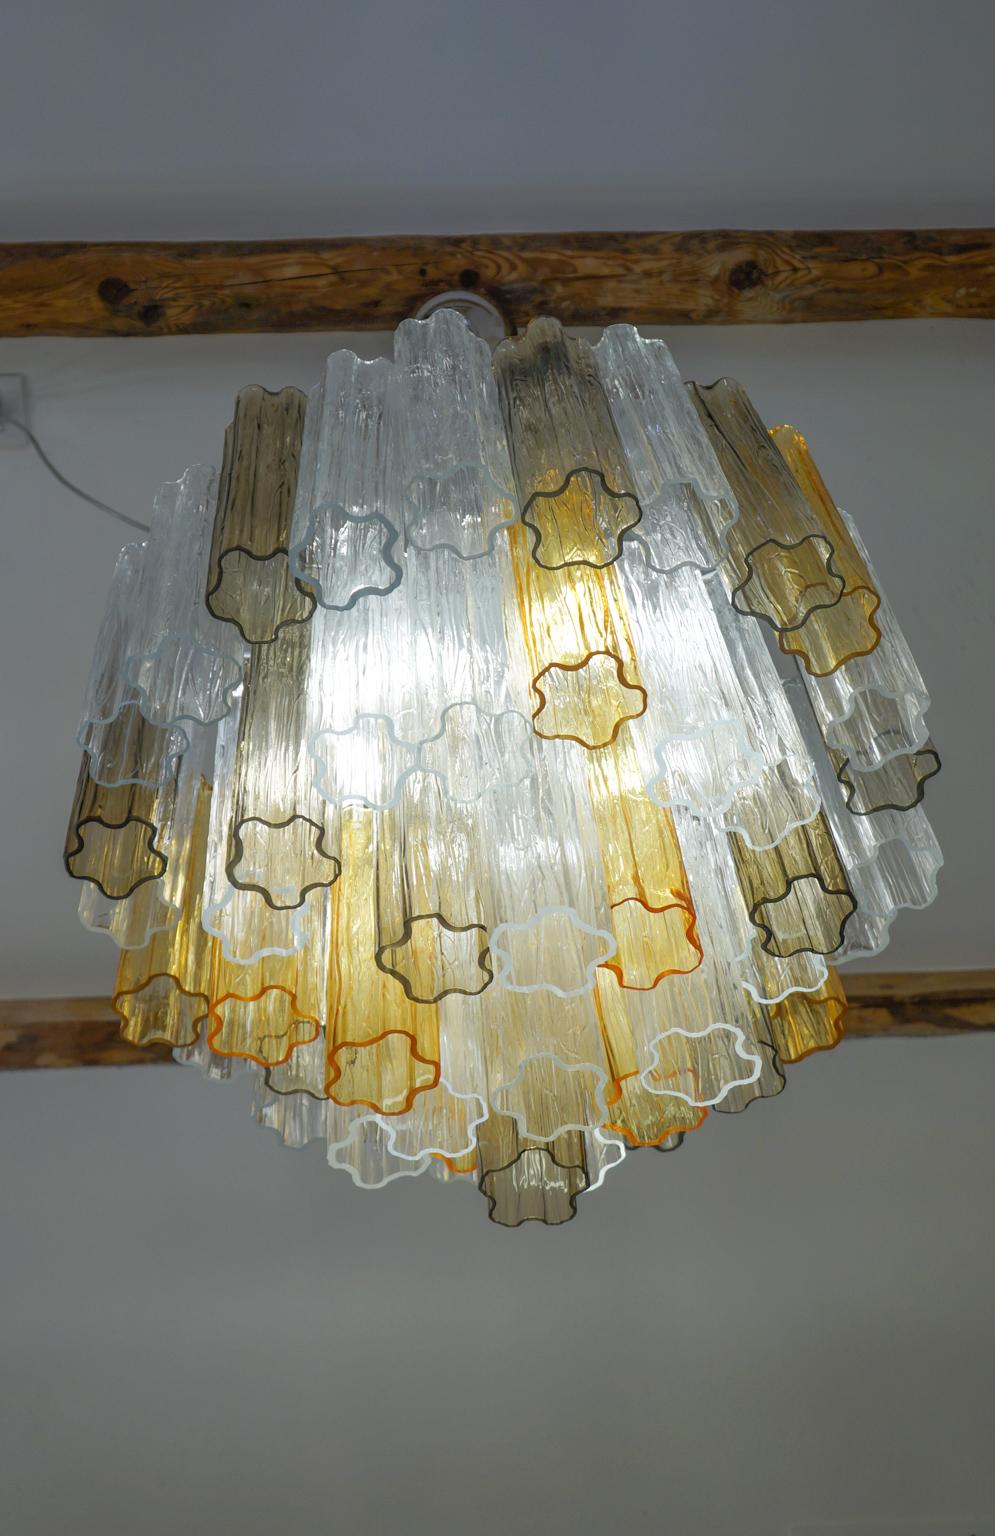 The chandelier you see in the photo is a vintage chandelier, designed in 1980 by Kalmar. It is composed of 49 elements called pipe-trunks and inside we find 5 bulbs that create wonderful play of light reflecting the transparency of the glass. At